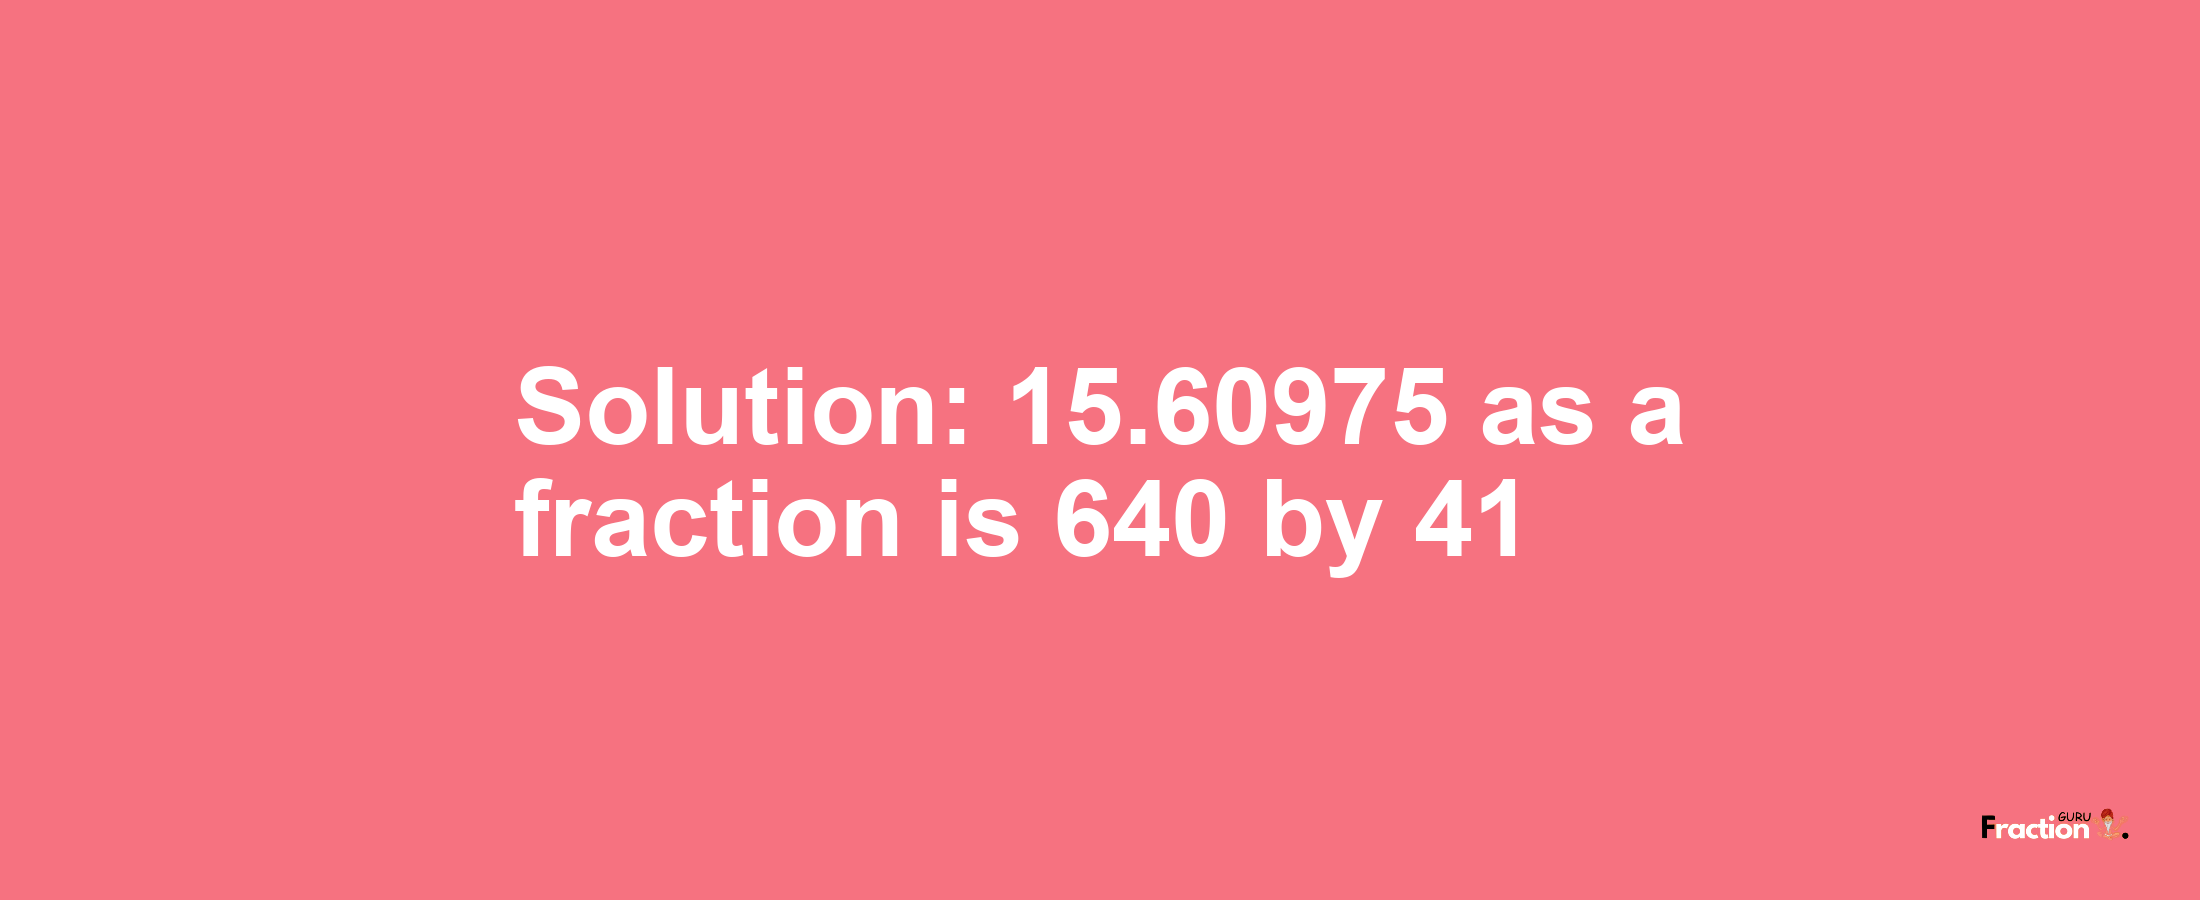 Solution:15.60975 as a fraction is 640/41